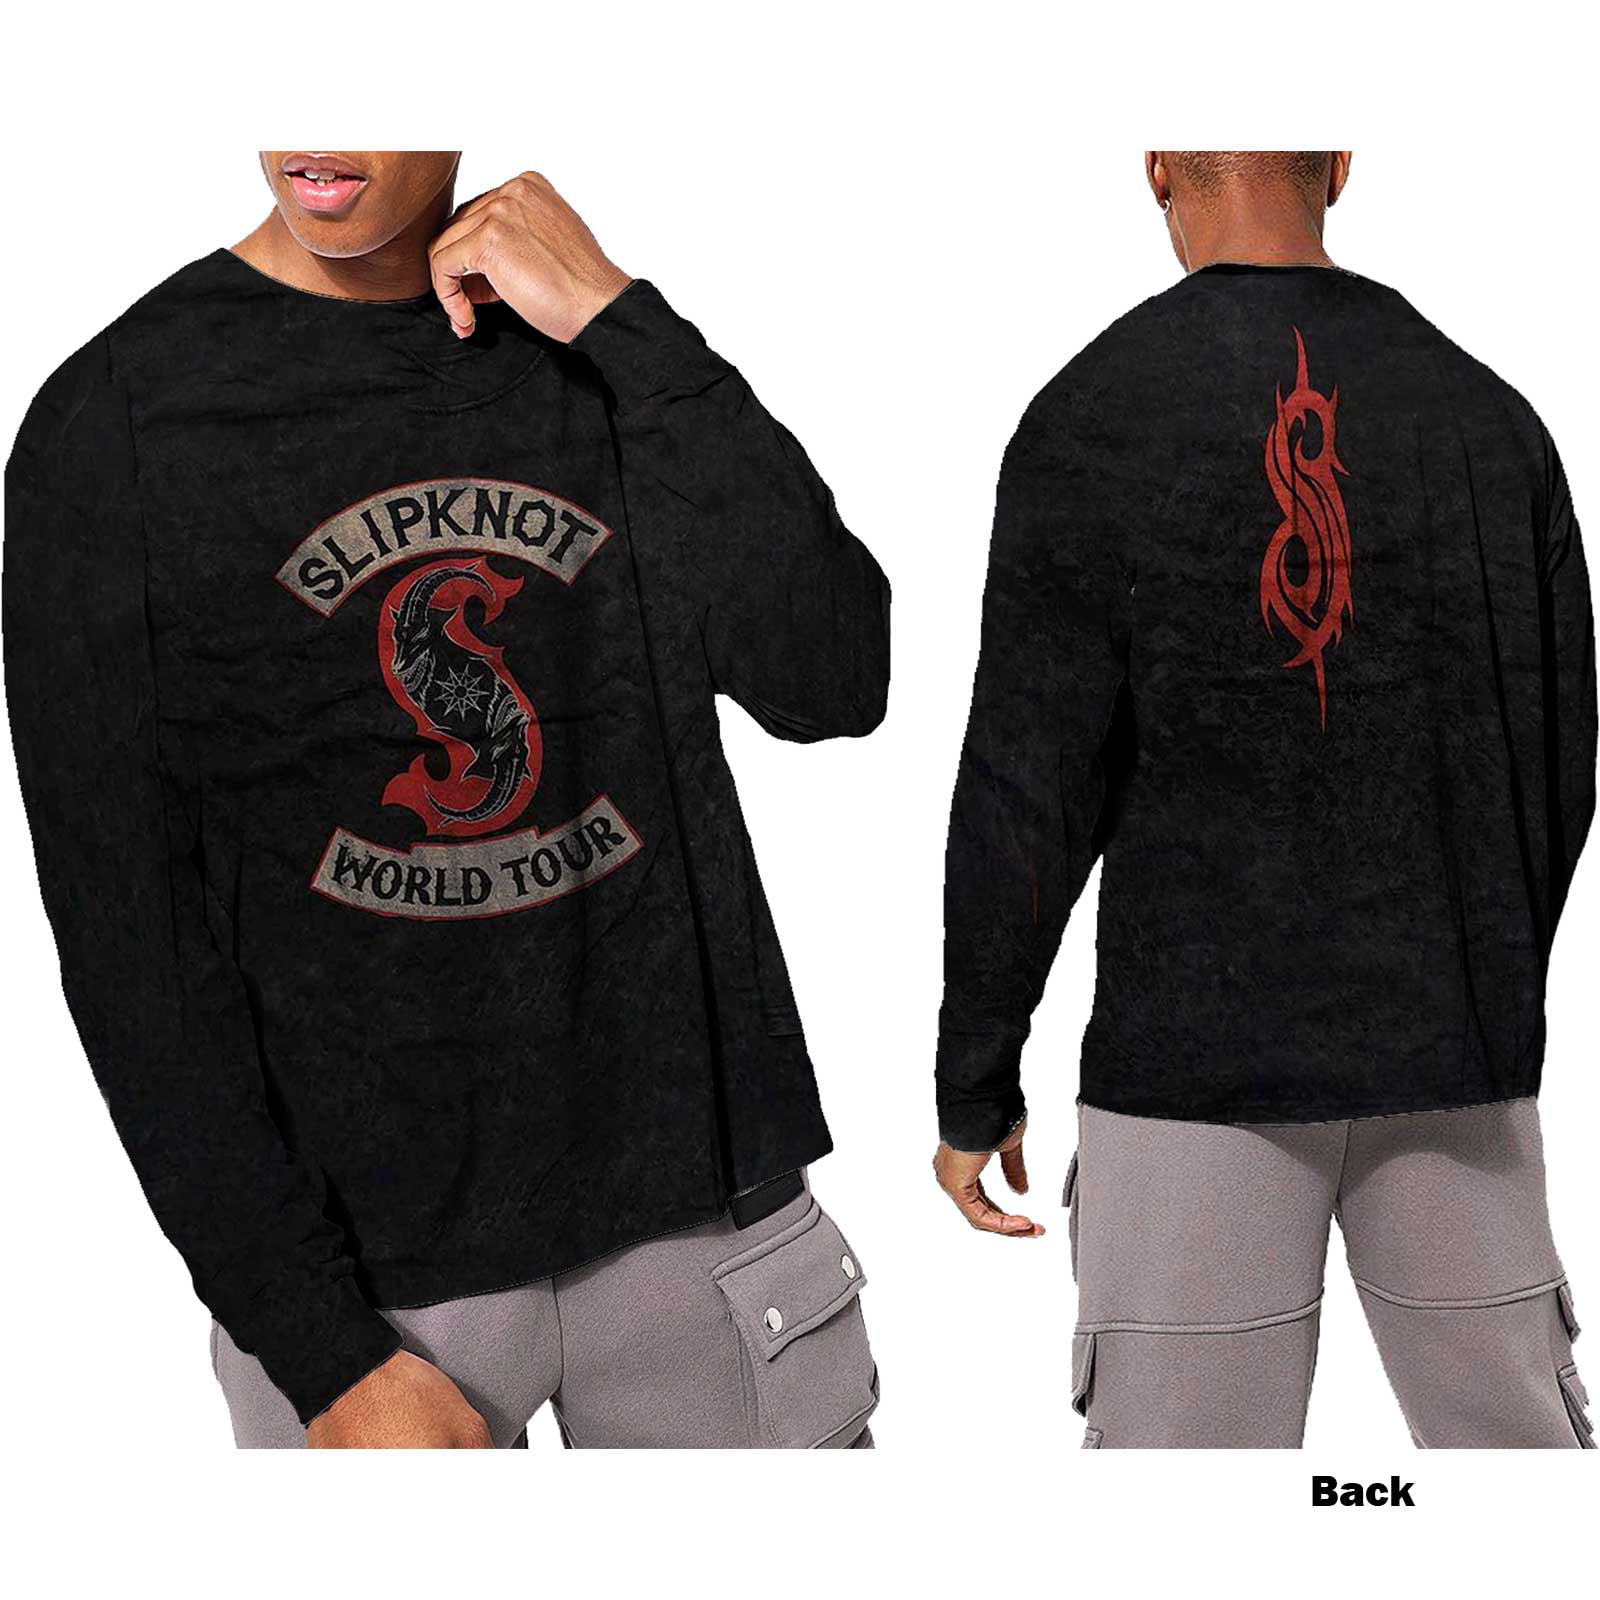 & Print) (XXXX-Large) Collection Patched Sleeve Slipknot Long T-Shirt Up Unisex Back (Wash